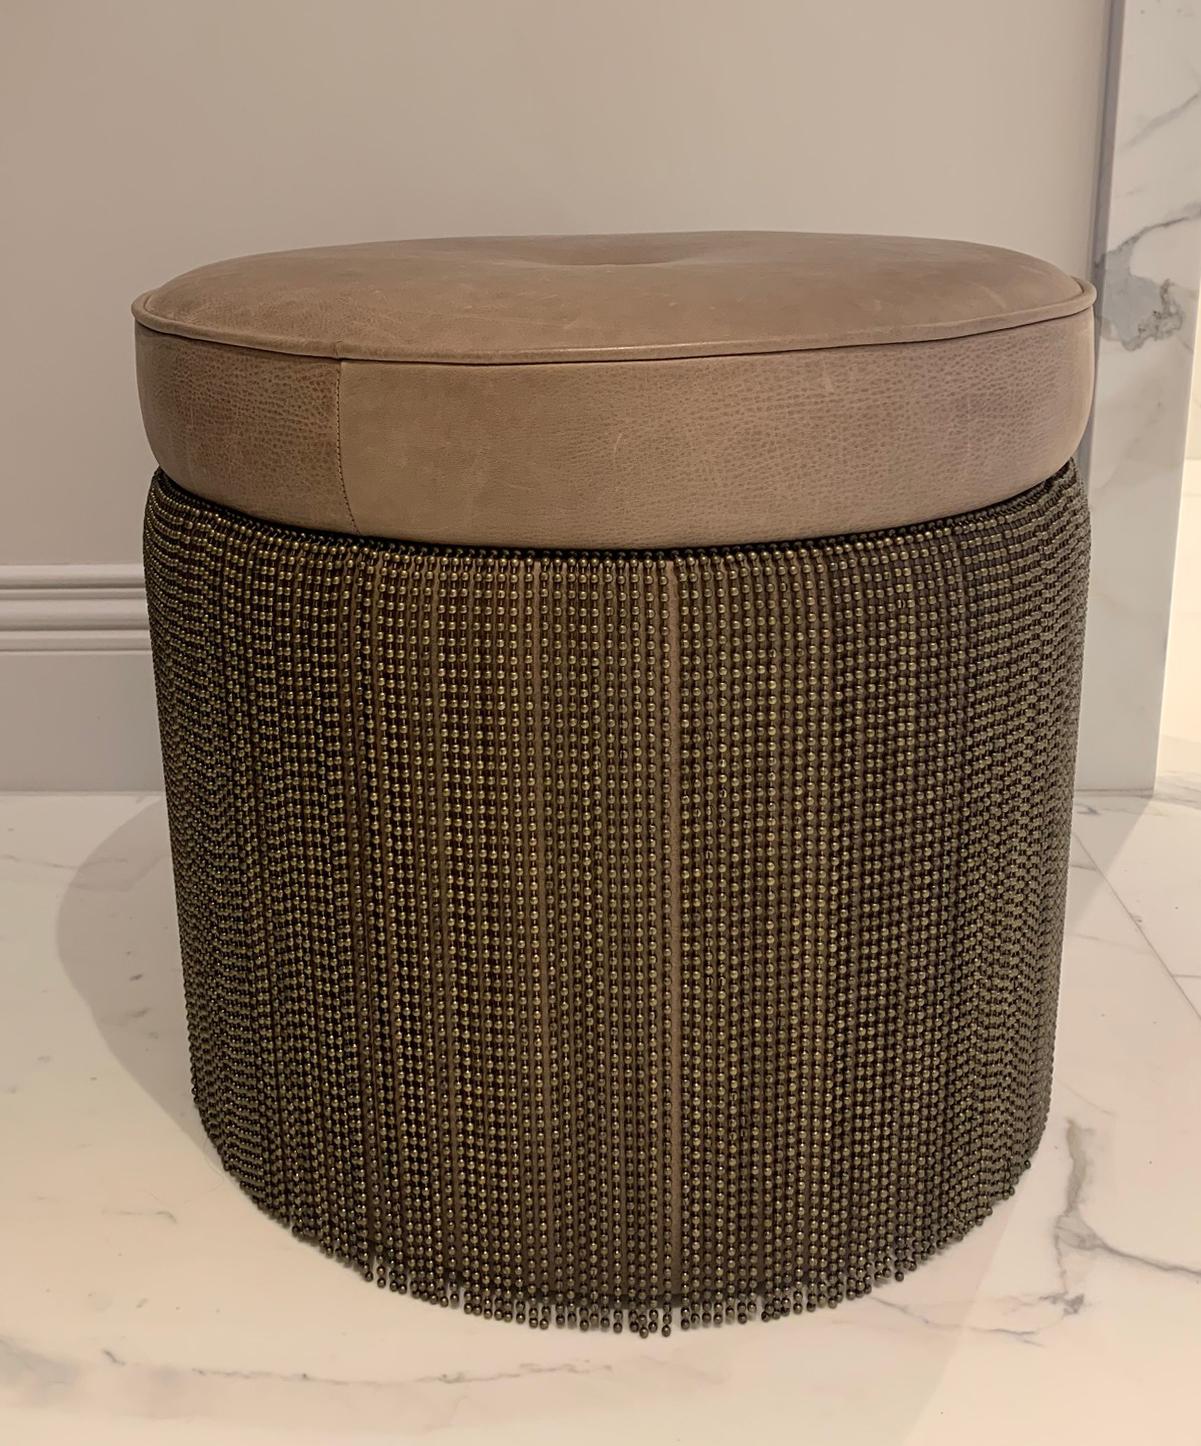 Upholstered leather ottoman. 

This contemporary ottoman features a round, soft brown leather cushion top with a brushed finish, supported by a cylindrical base adorned with antiqued bronze ball chains. The artisanal touch is evident in the unique